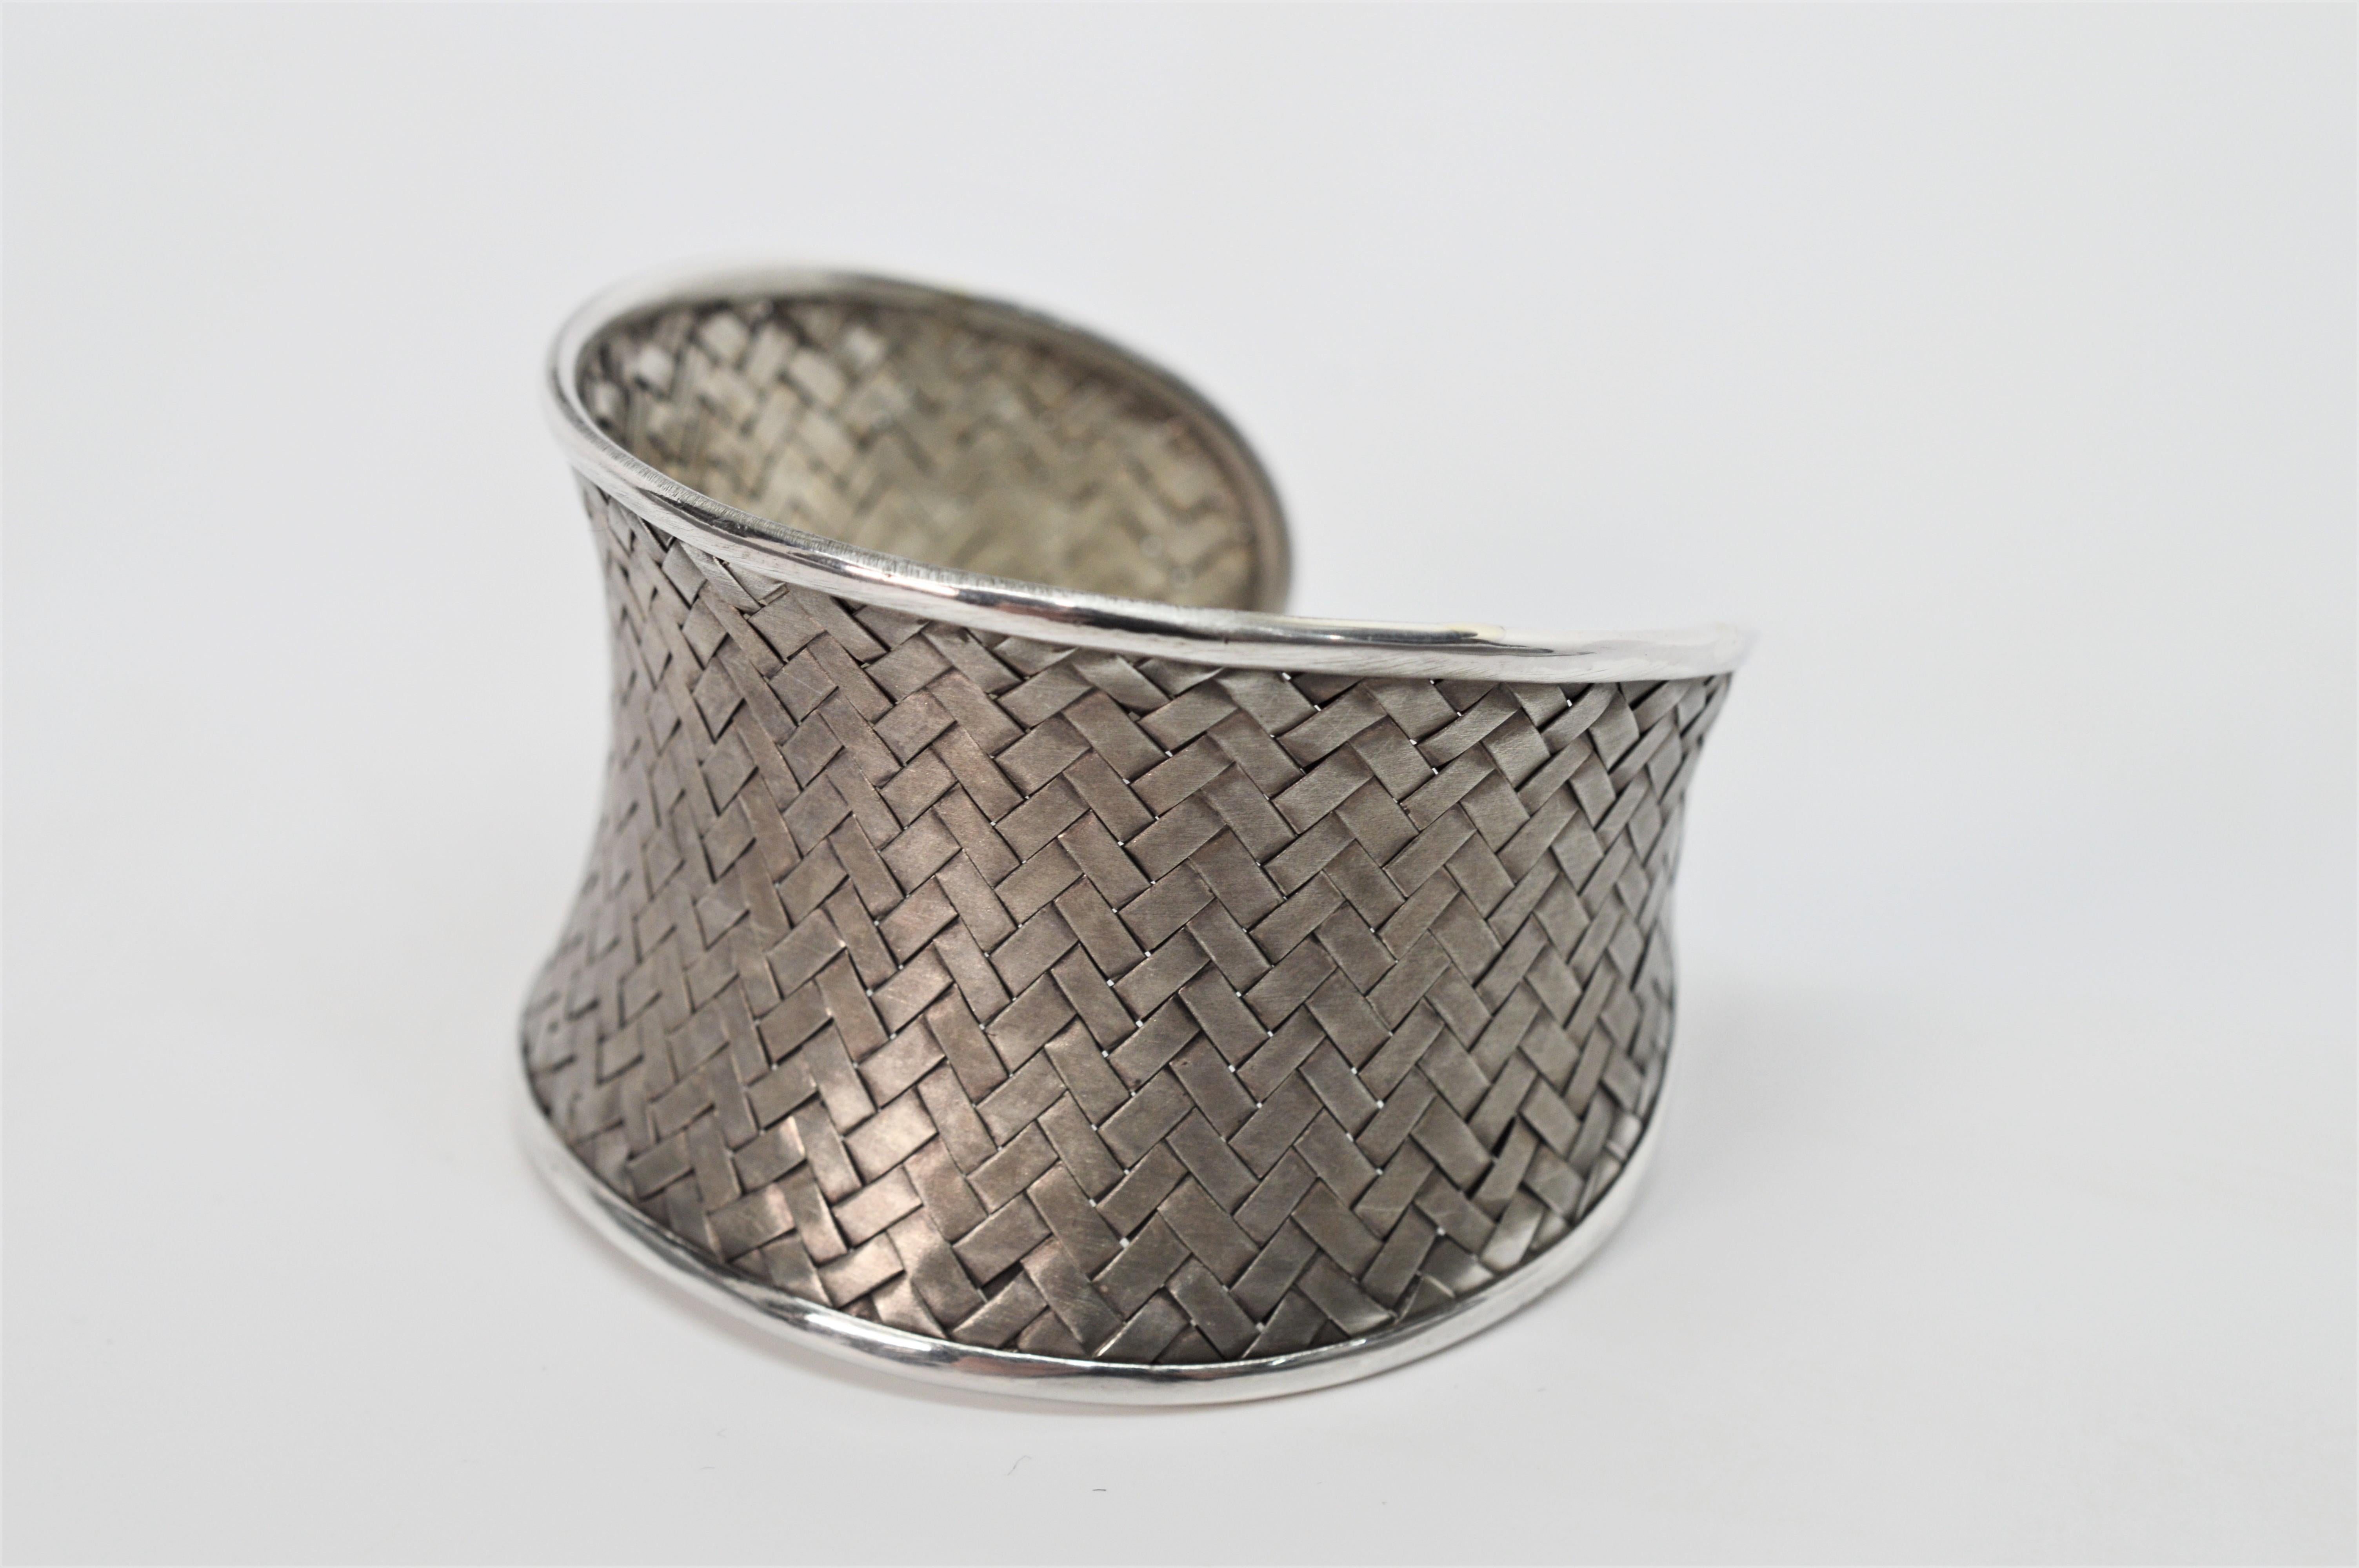 This contemporary silver cuff bracelet displays plenty of texture and flair in its unique basket weave design. Handmade by Mikolay of Chappaqua, the fine silver weave with a pleasing satin patina has a concave shape and is framed with contrasting